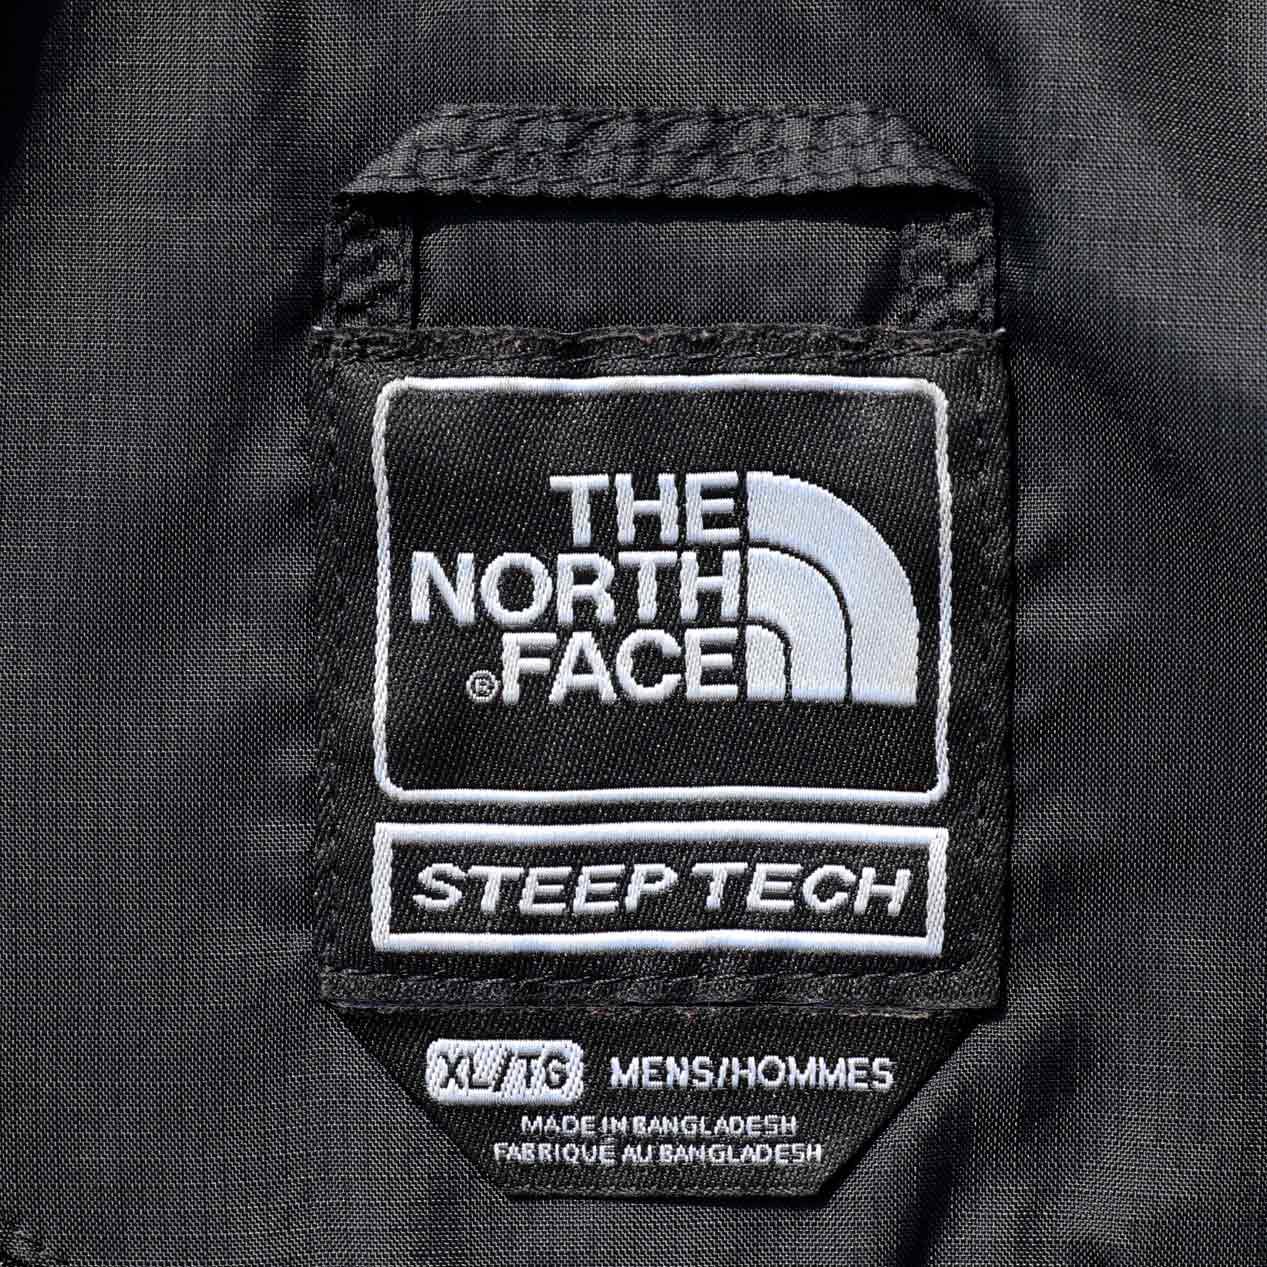 POST JUNK / 's～ THE NORTH FACE ”STEEP TECH” ブラック ナイロン